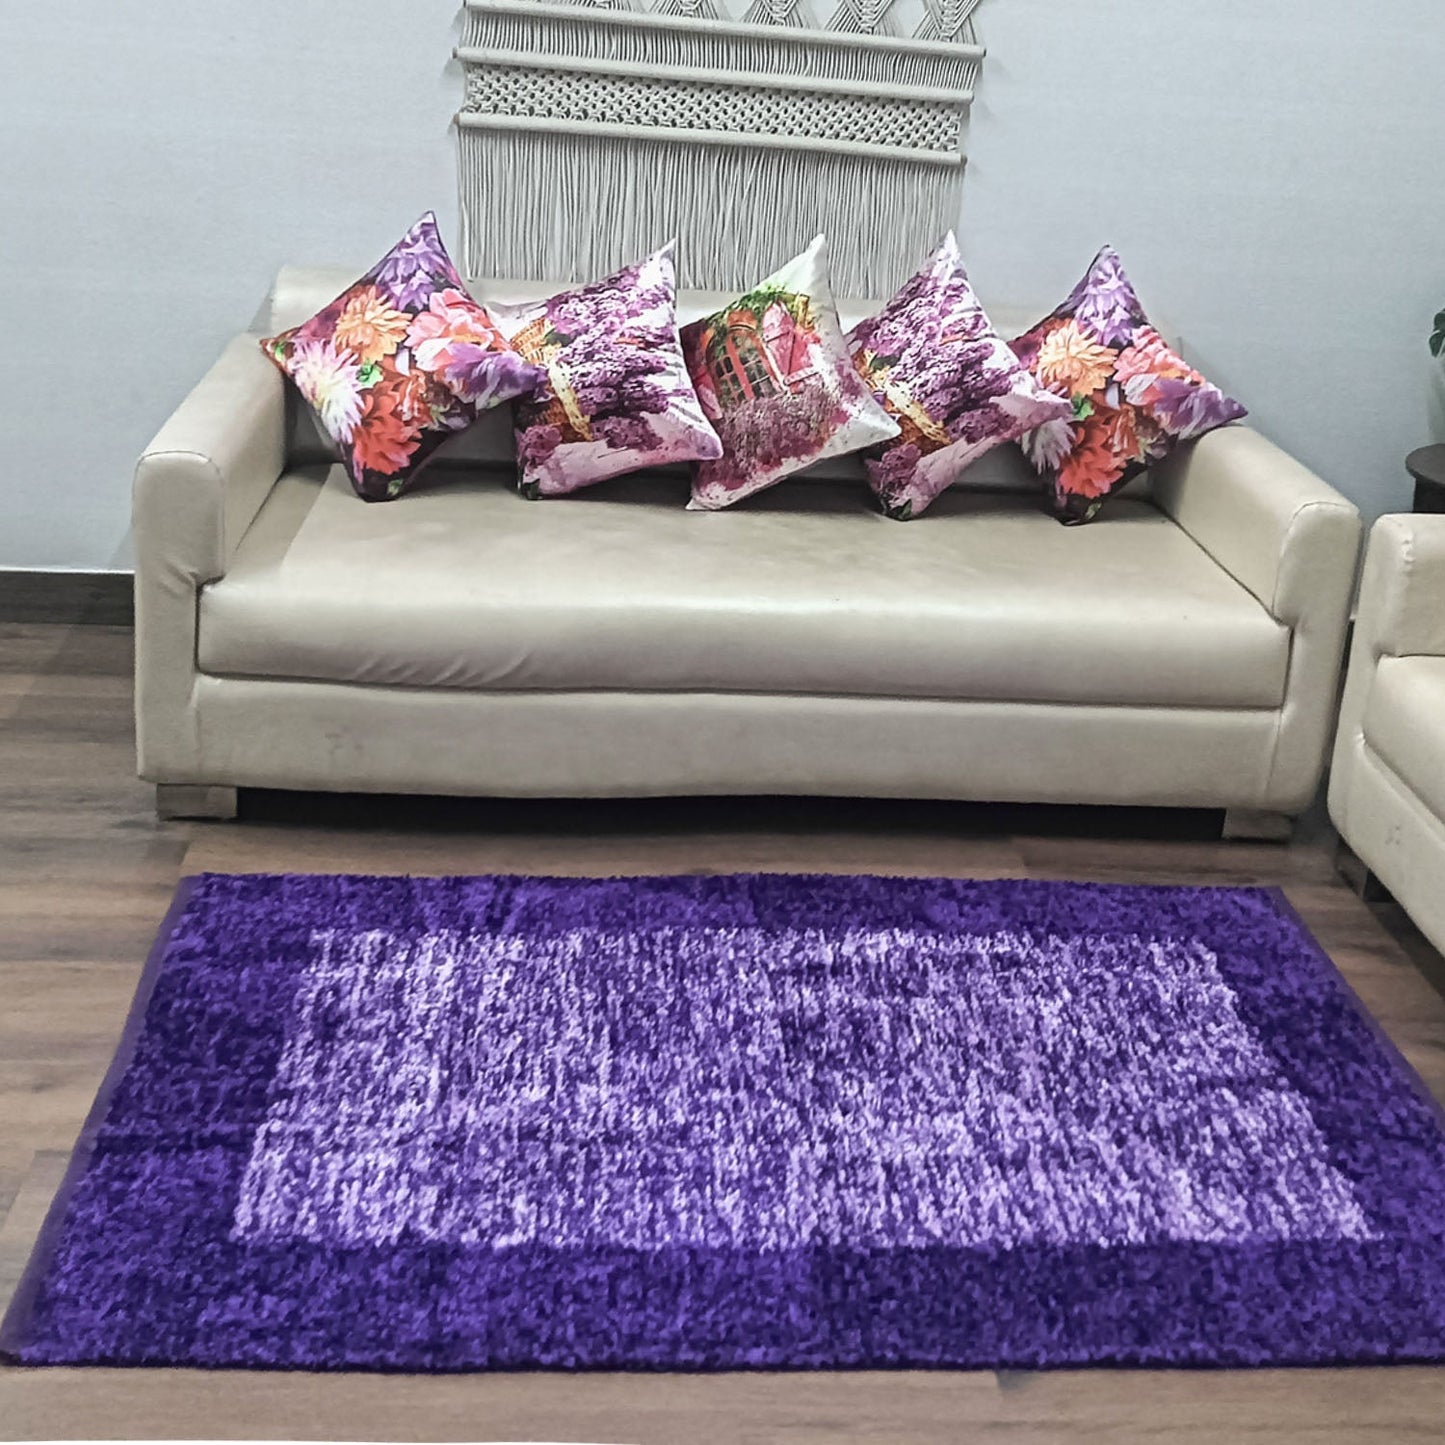 Avioni Handloom Cut Shuttle Rugs by Master Artisans | Soft Touch | Home Washable | Border Design in Purple and White  | Reversible - 3 feet x 5 feet (~90 cm x 150 cm)